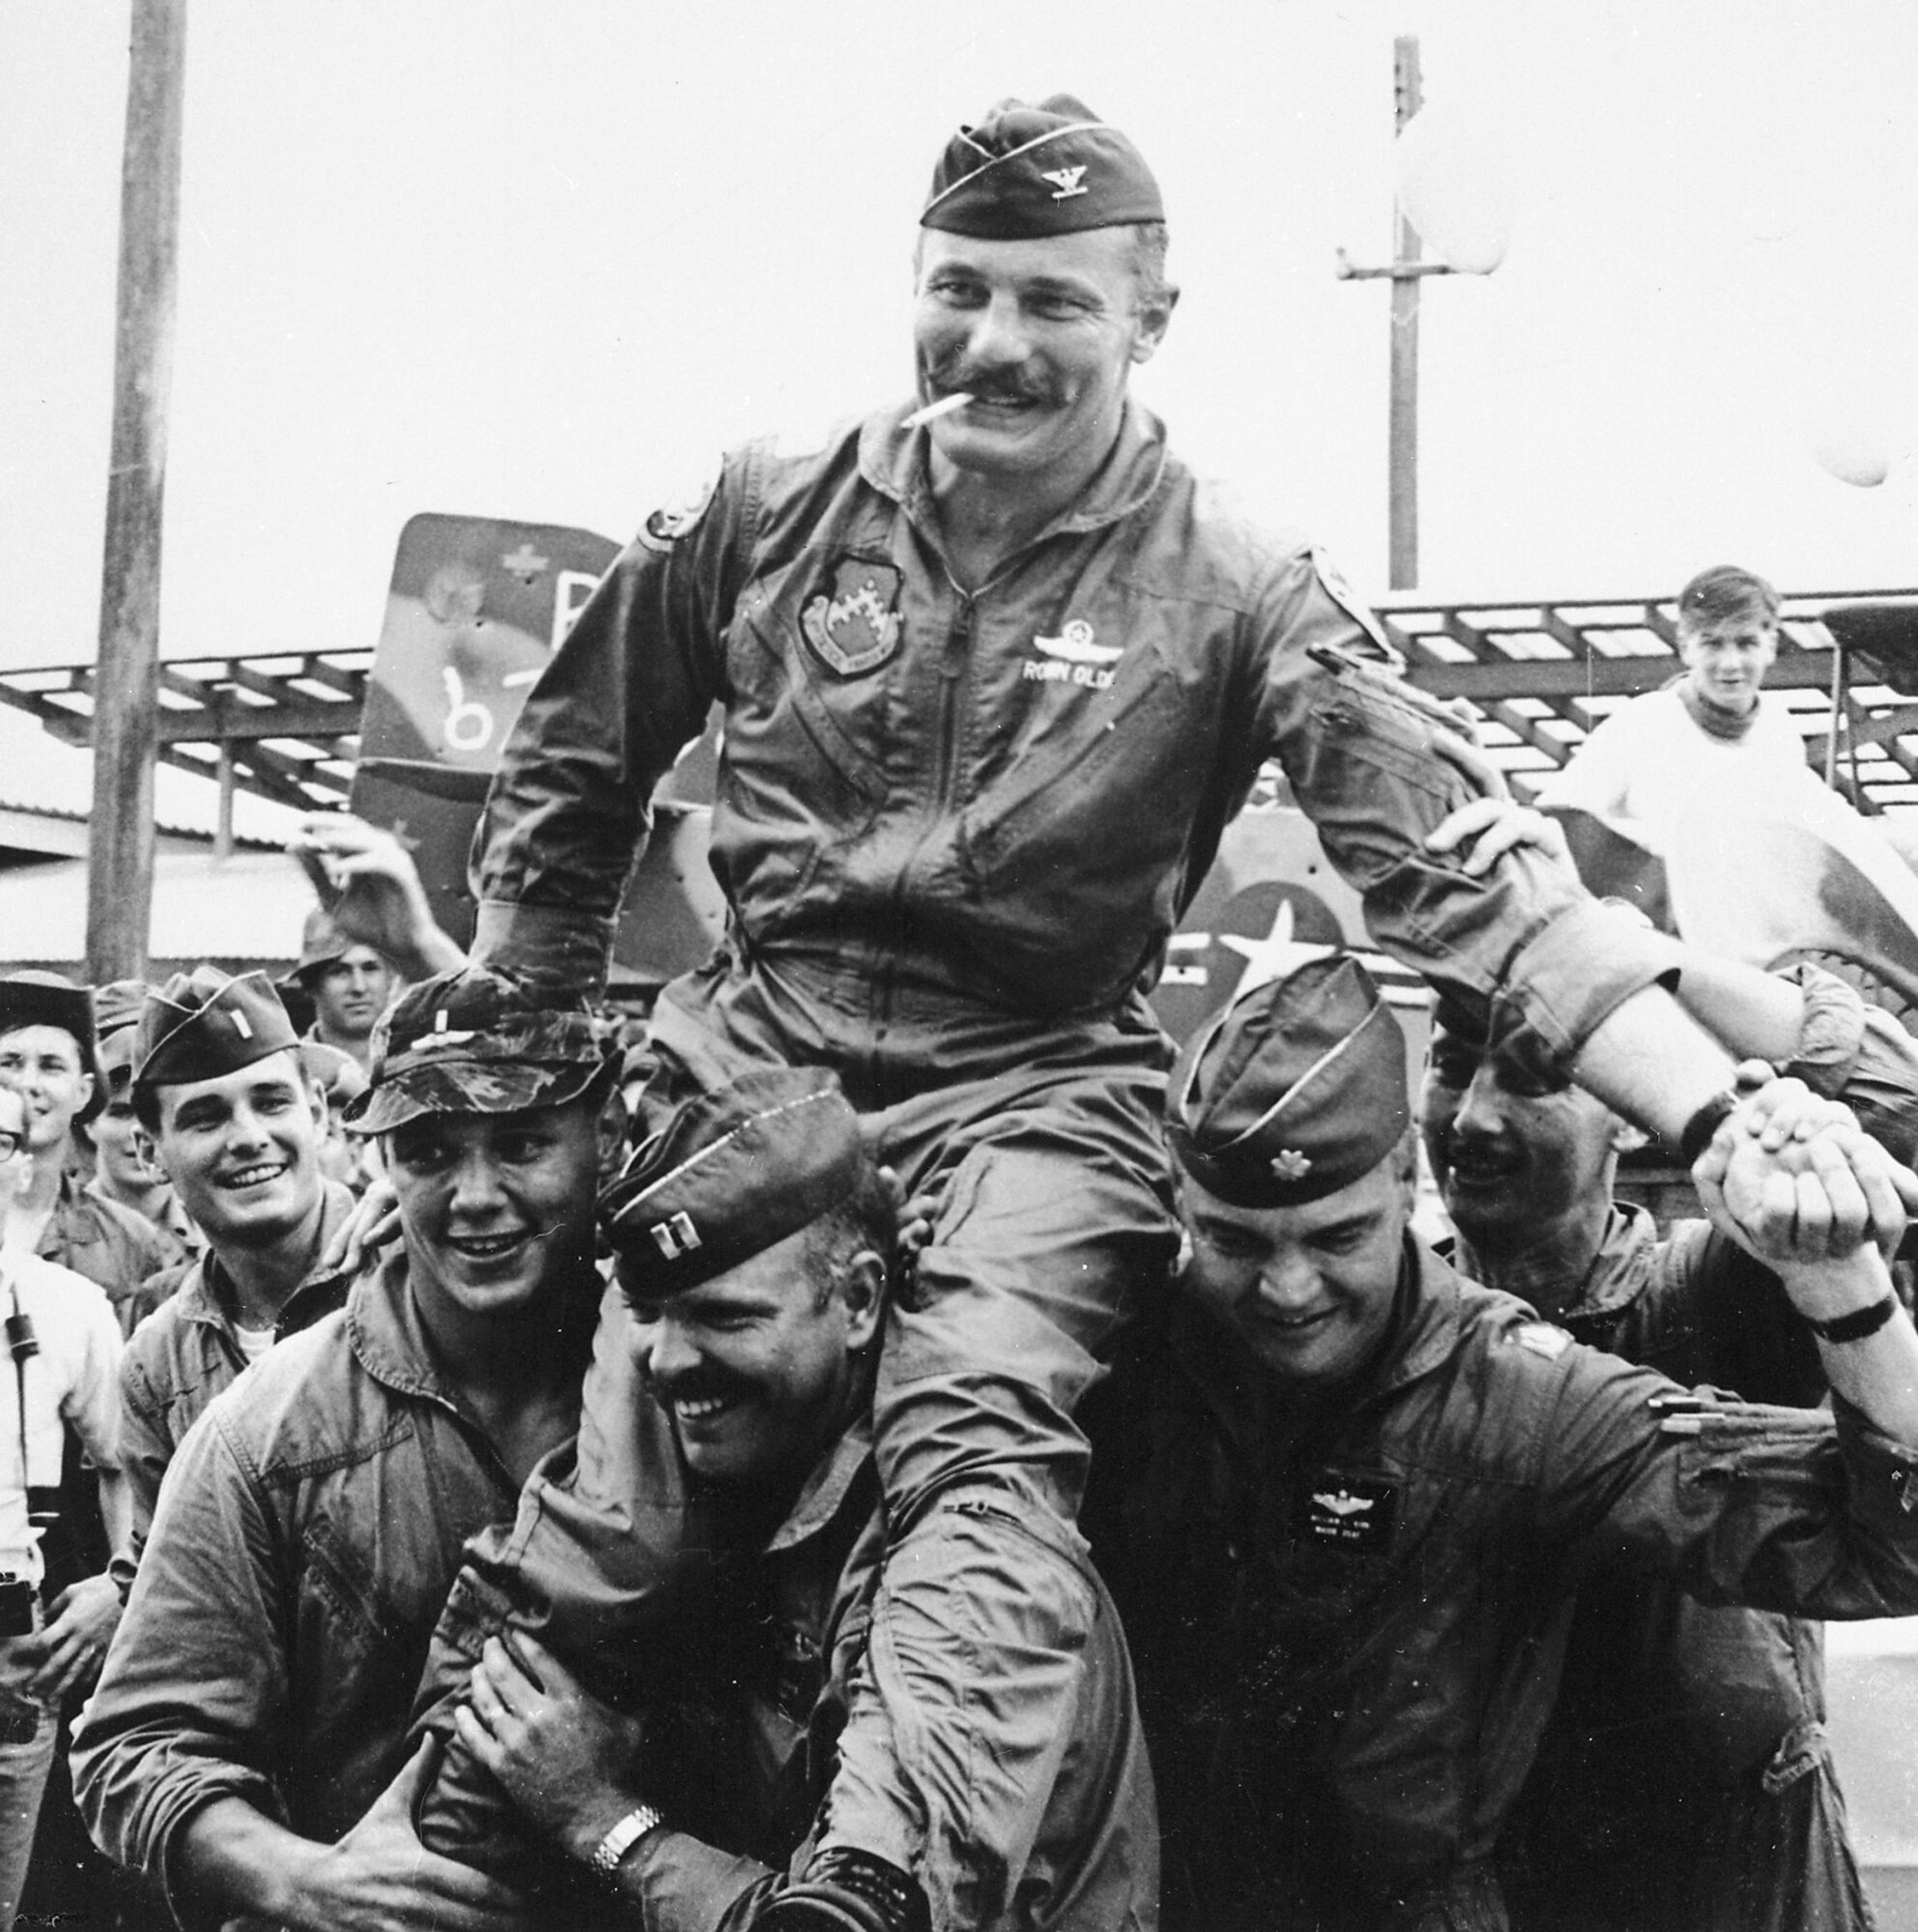 "Wolfpack" aviators of the 8th Tactical Fighter Wing carry their Commanding Officer, Colonel Robin Olds, following his return from his last combat mission over North Vietnam, on 23 September 1967. This mission was his hundredth "official" combat mission, but his actual combat mission total for his tour was 152. Olds led the 8th TFW Wolfpack from September 1966 through September 1967, as it amassed 24 MiG victories, the greatest aerial combat record of an F-4 Wing in the Vietnam war. (U.S. Air Force photo)